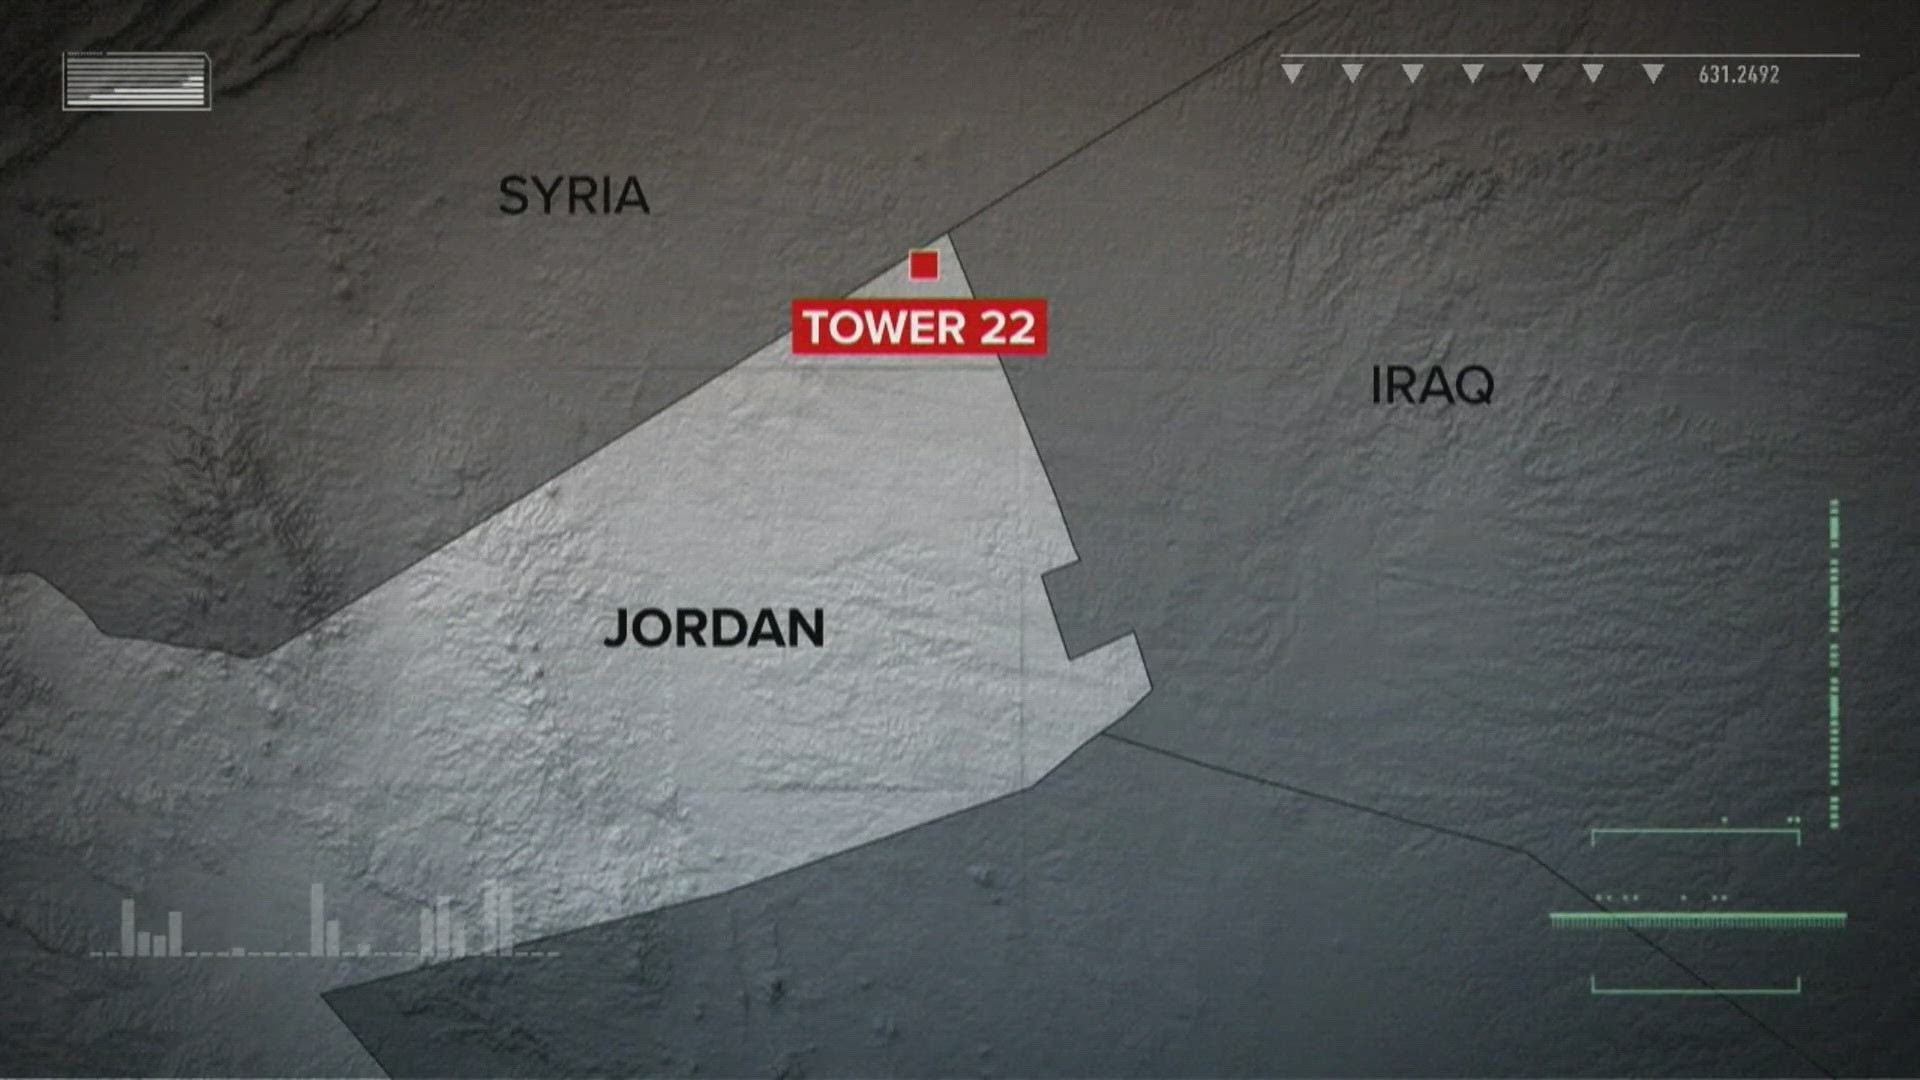 As the enemy drone was flying in at a low altitude, a U.S. drone was returning to the small installation known as Tower 22, according to a preliminary report.